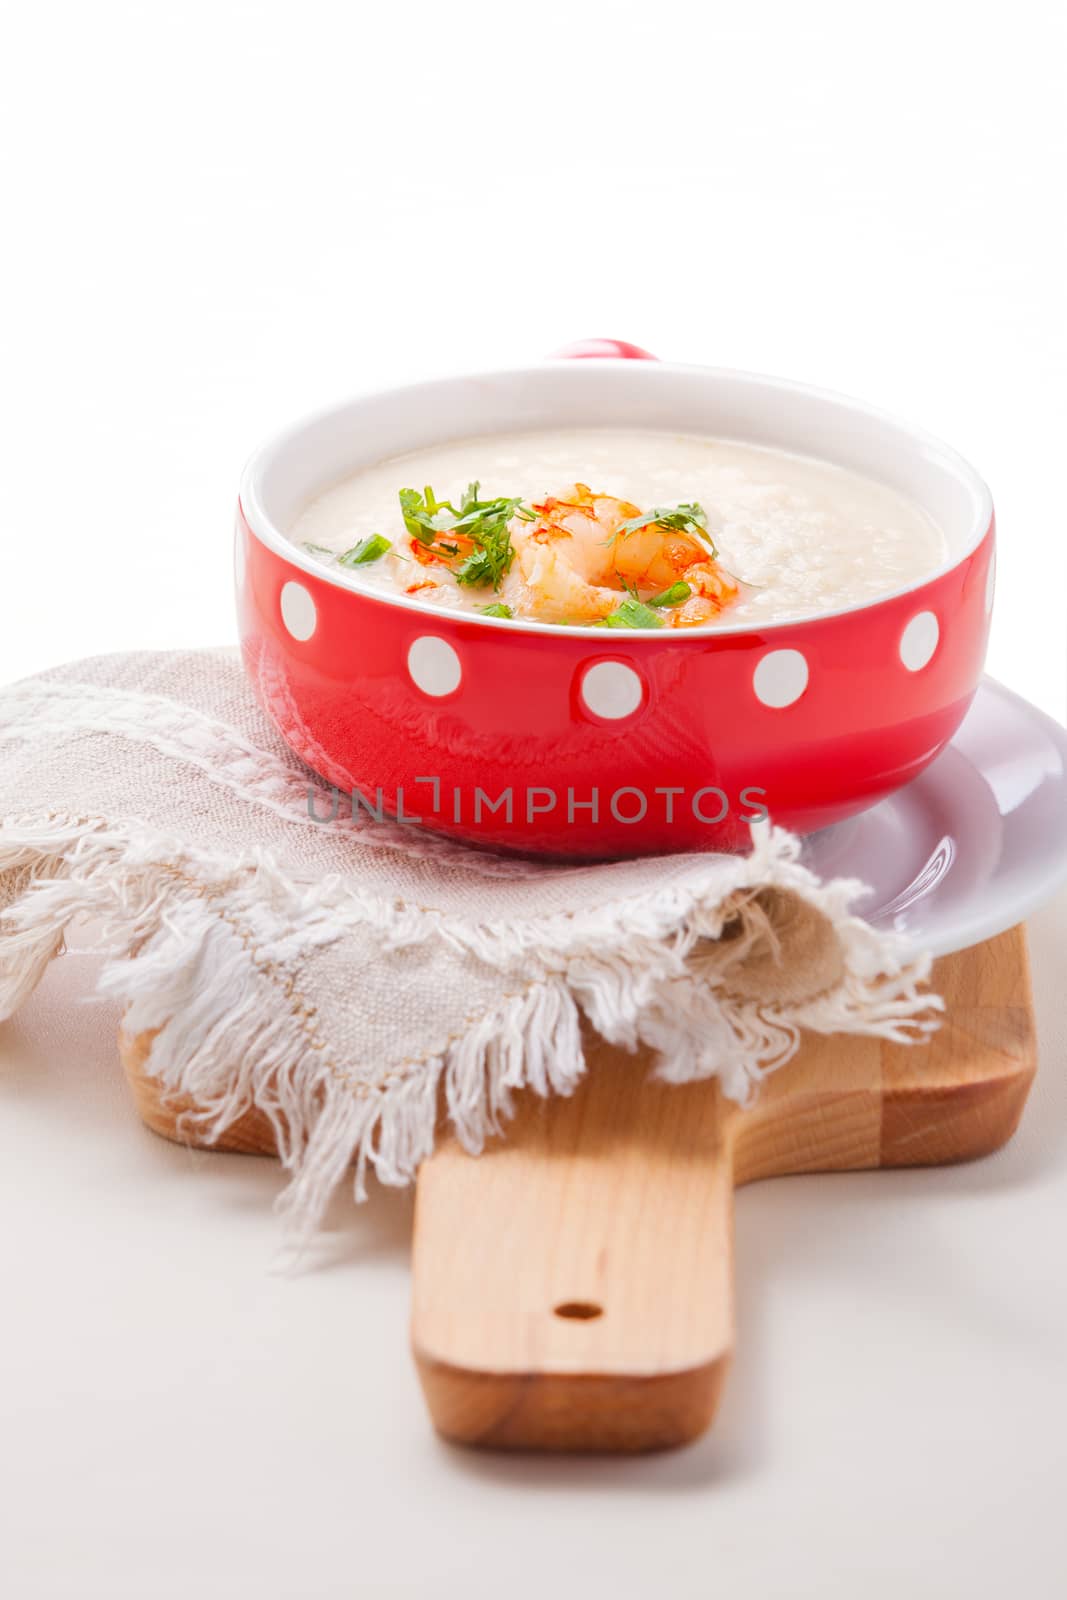 A bowl of creamy cauliflower soup by supercat67